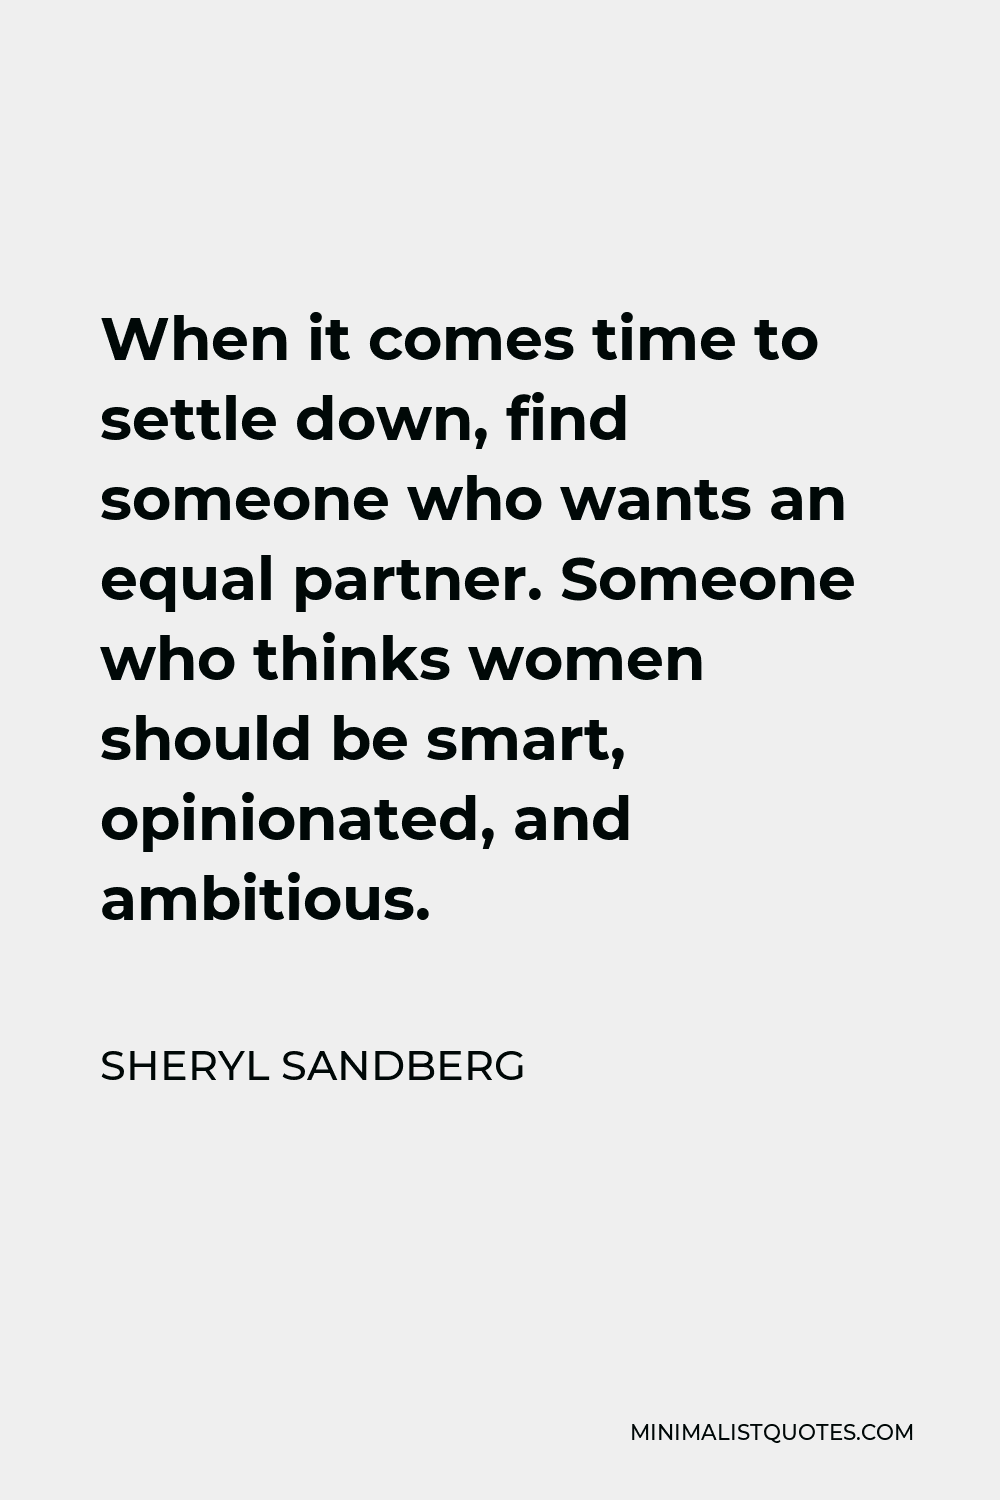 Sheryl Sandberg Quote - When it comes time to settle down, find someone who wants an equal partner. Someone who thinks women should be smart, opinionated, and ambitious.